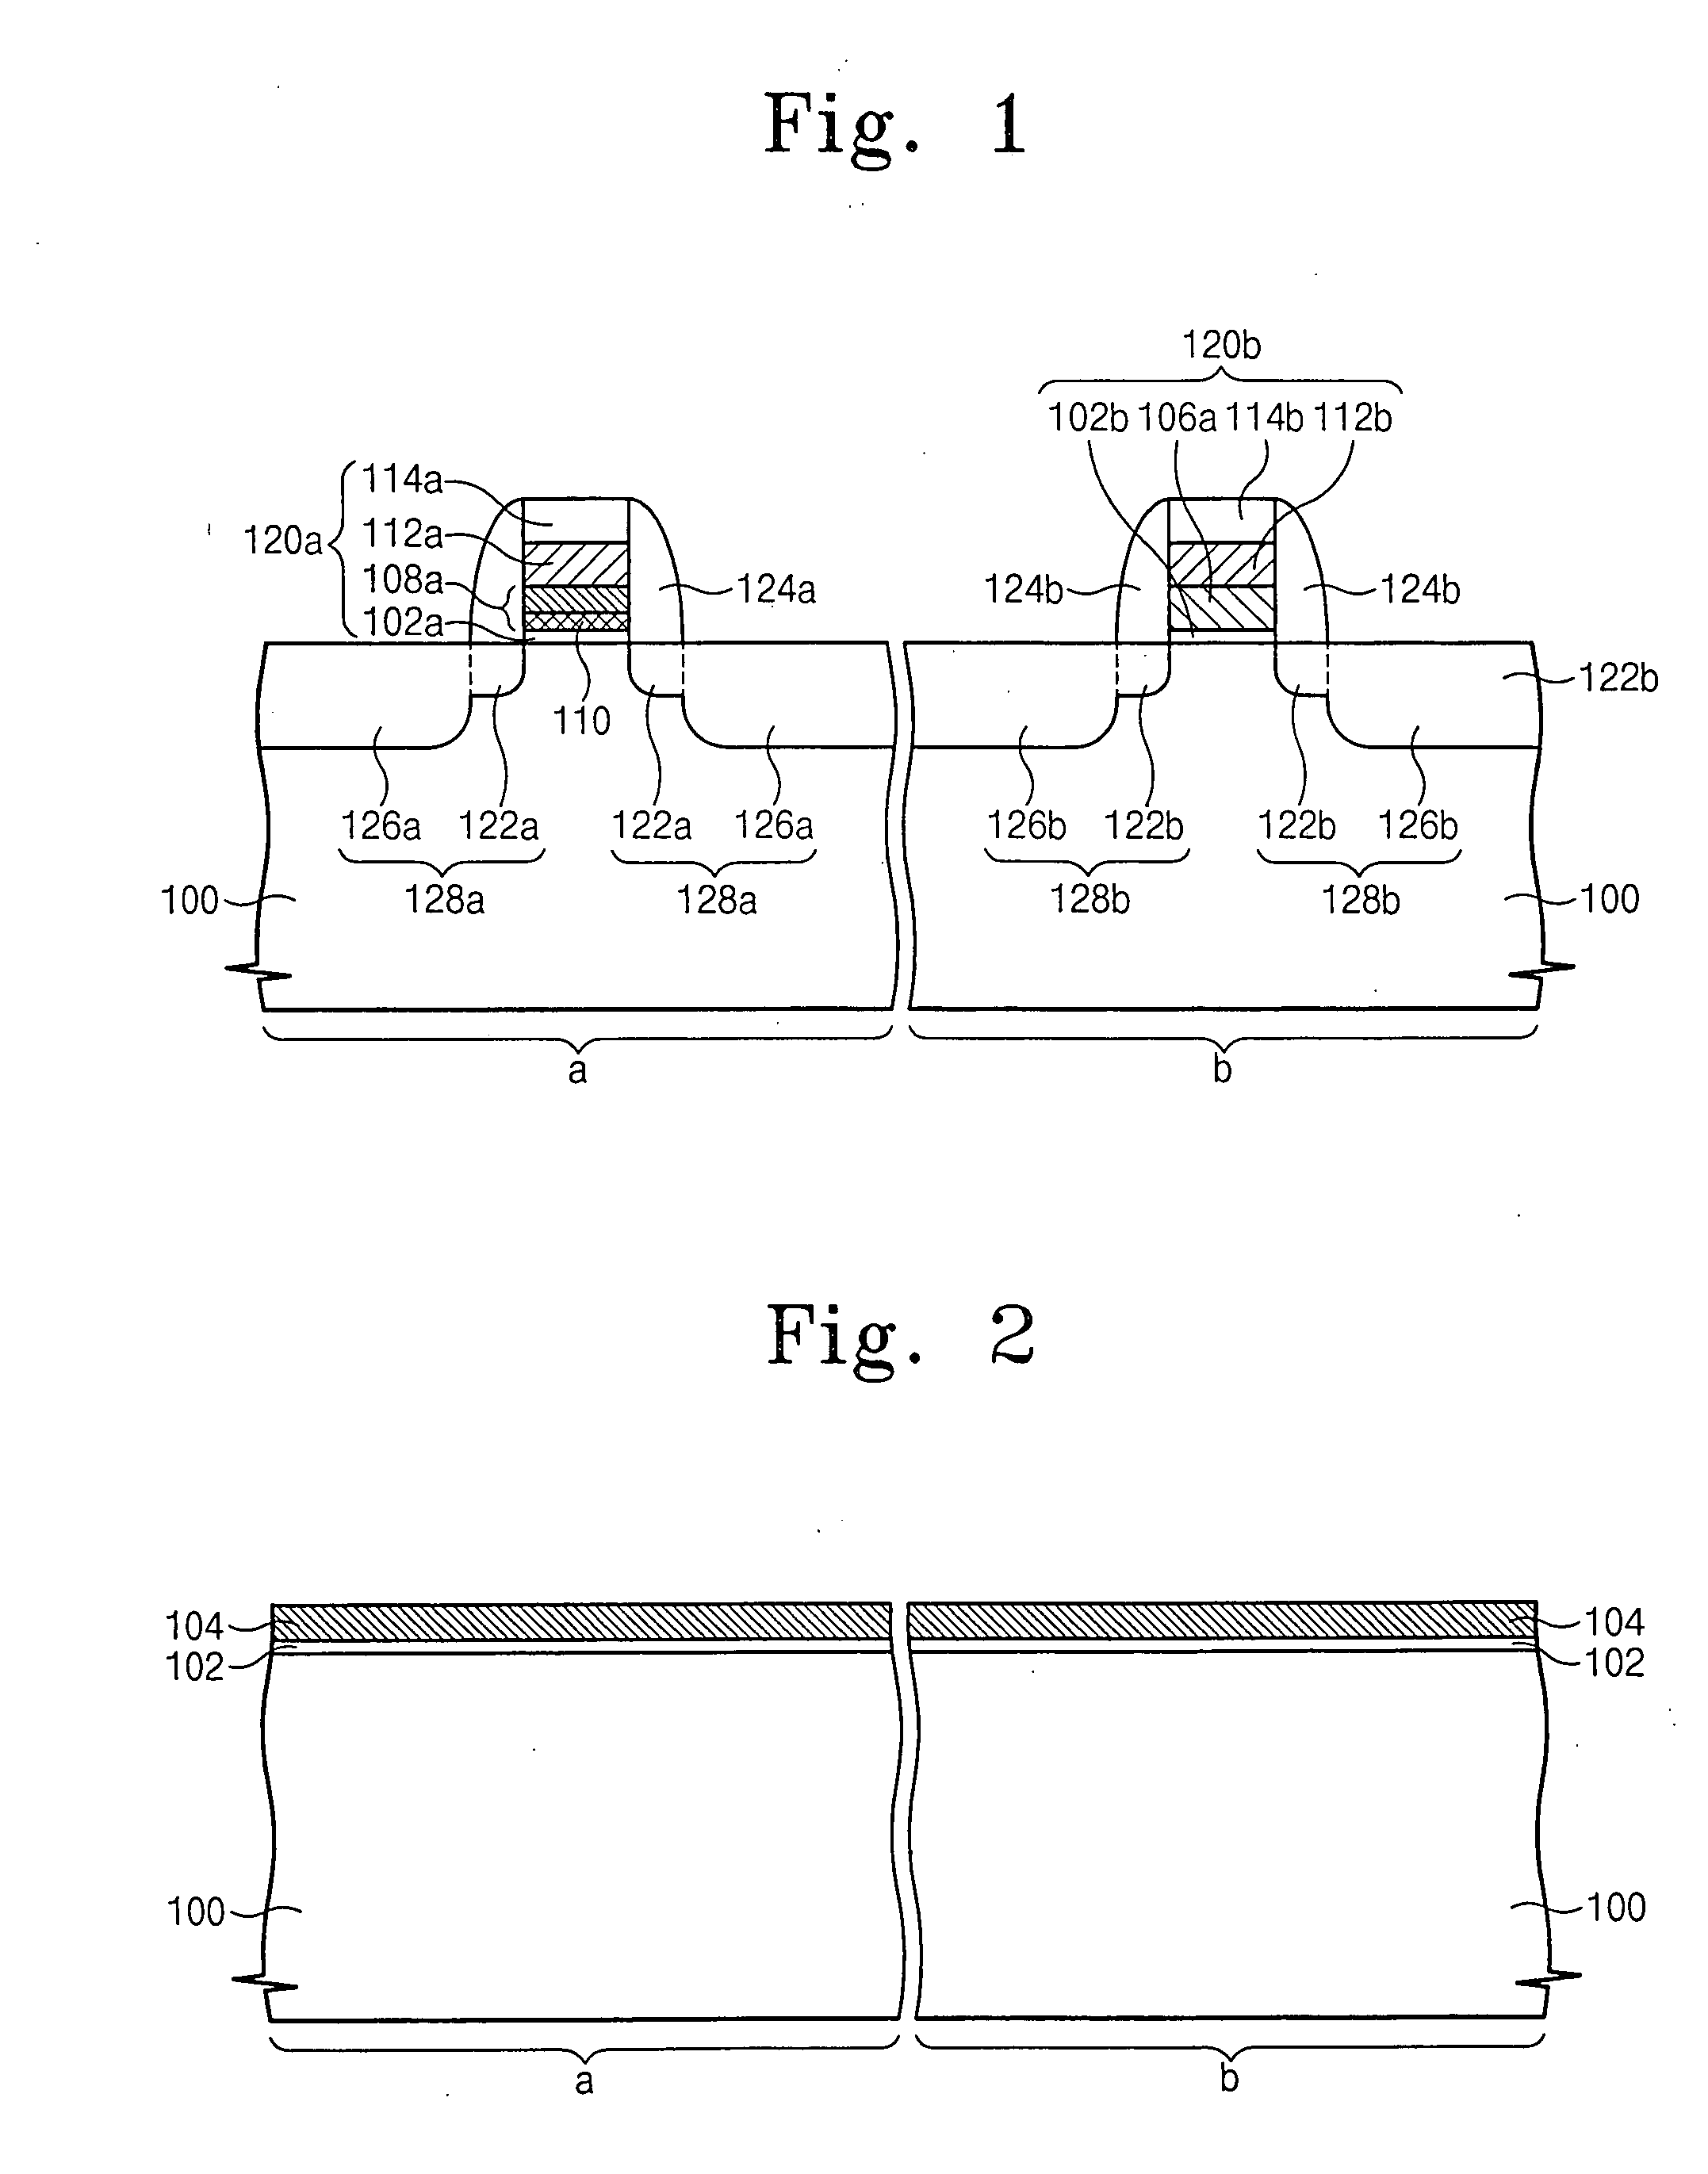 Semiconductor device having dual gate electrode and related method of formation